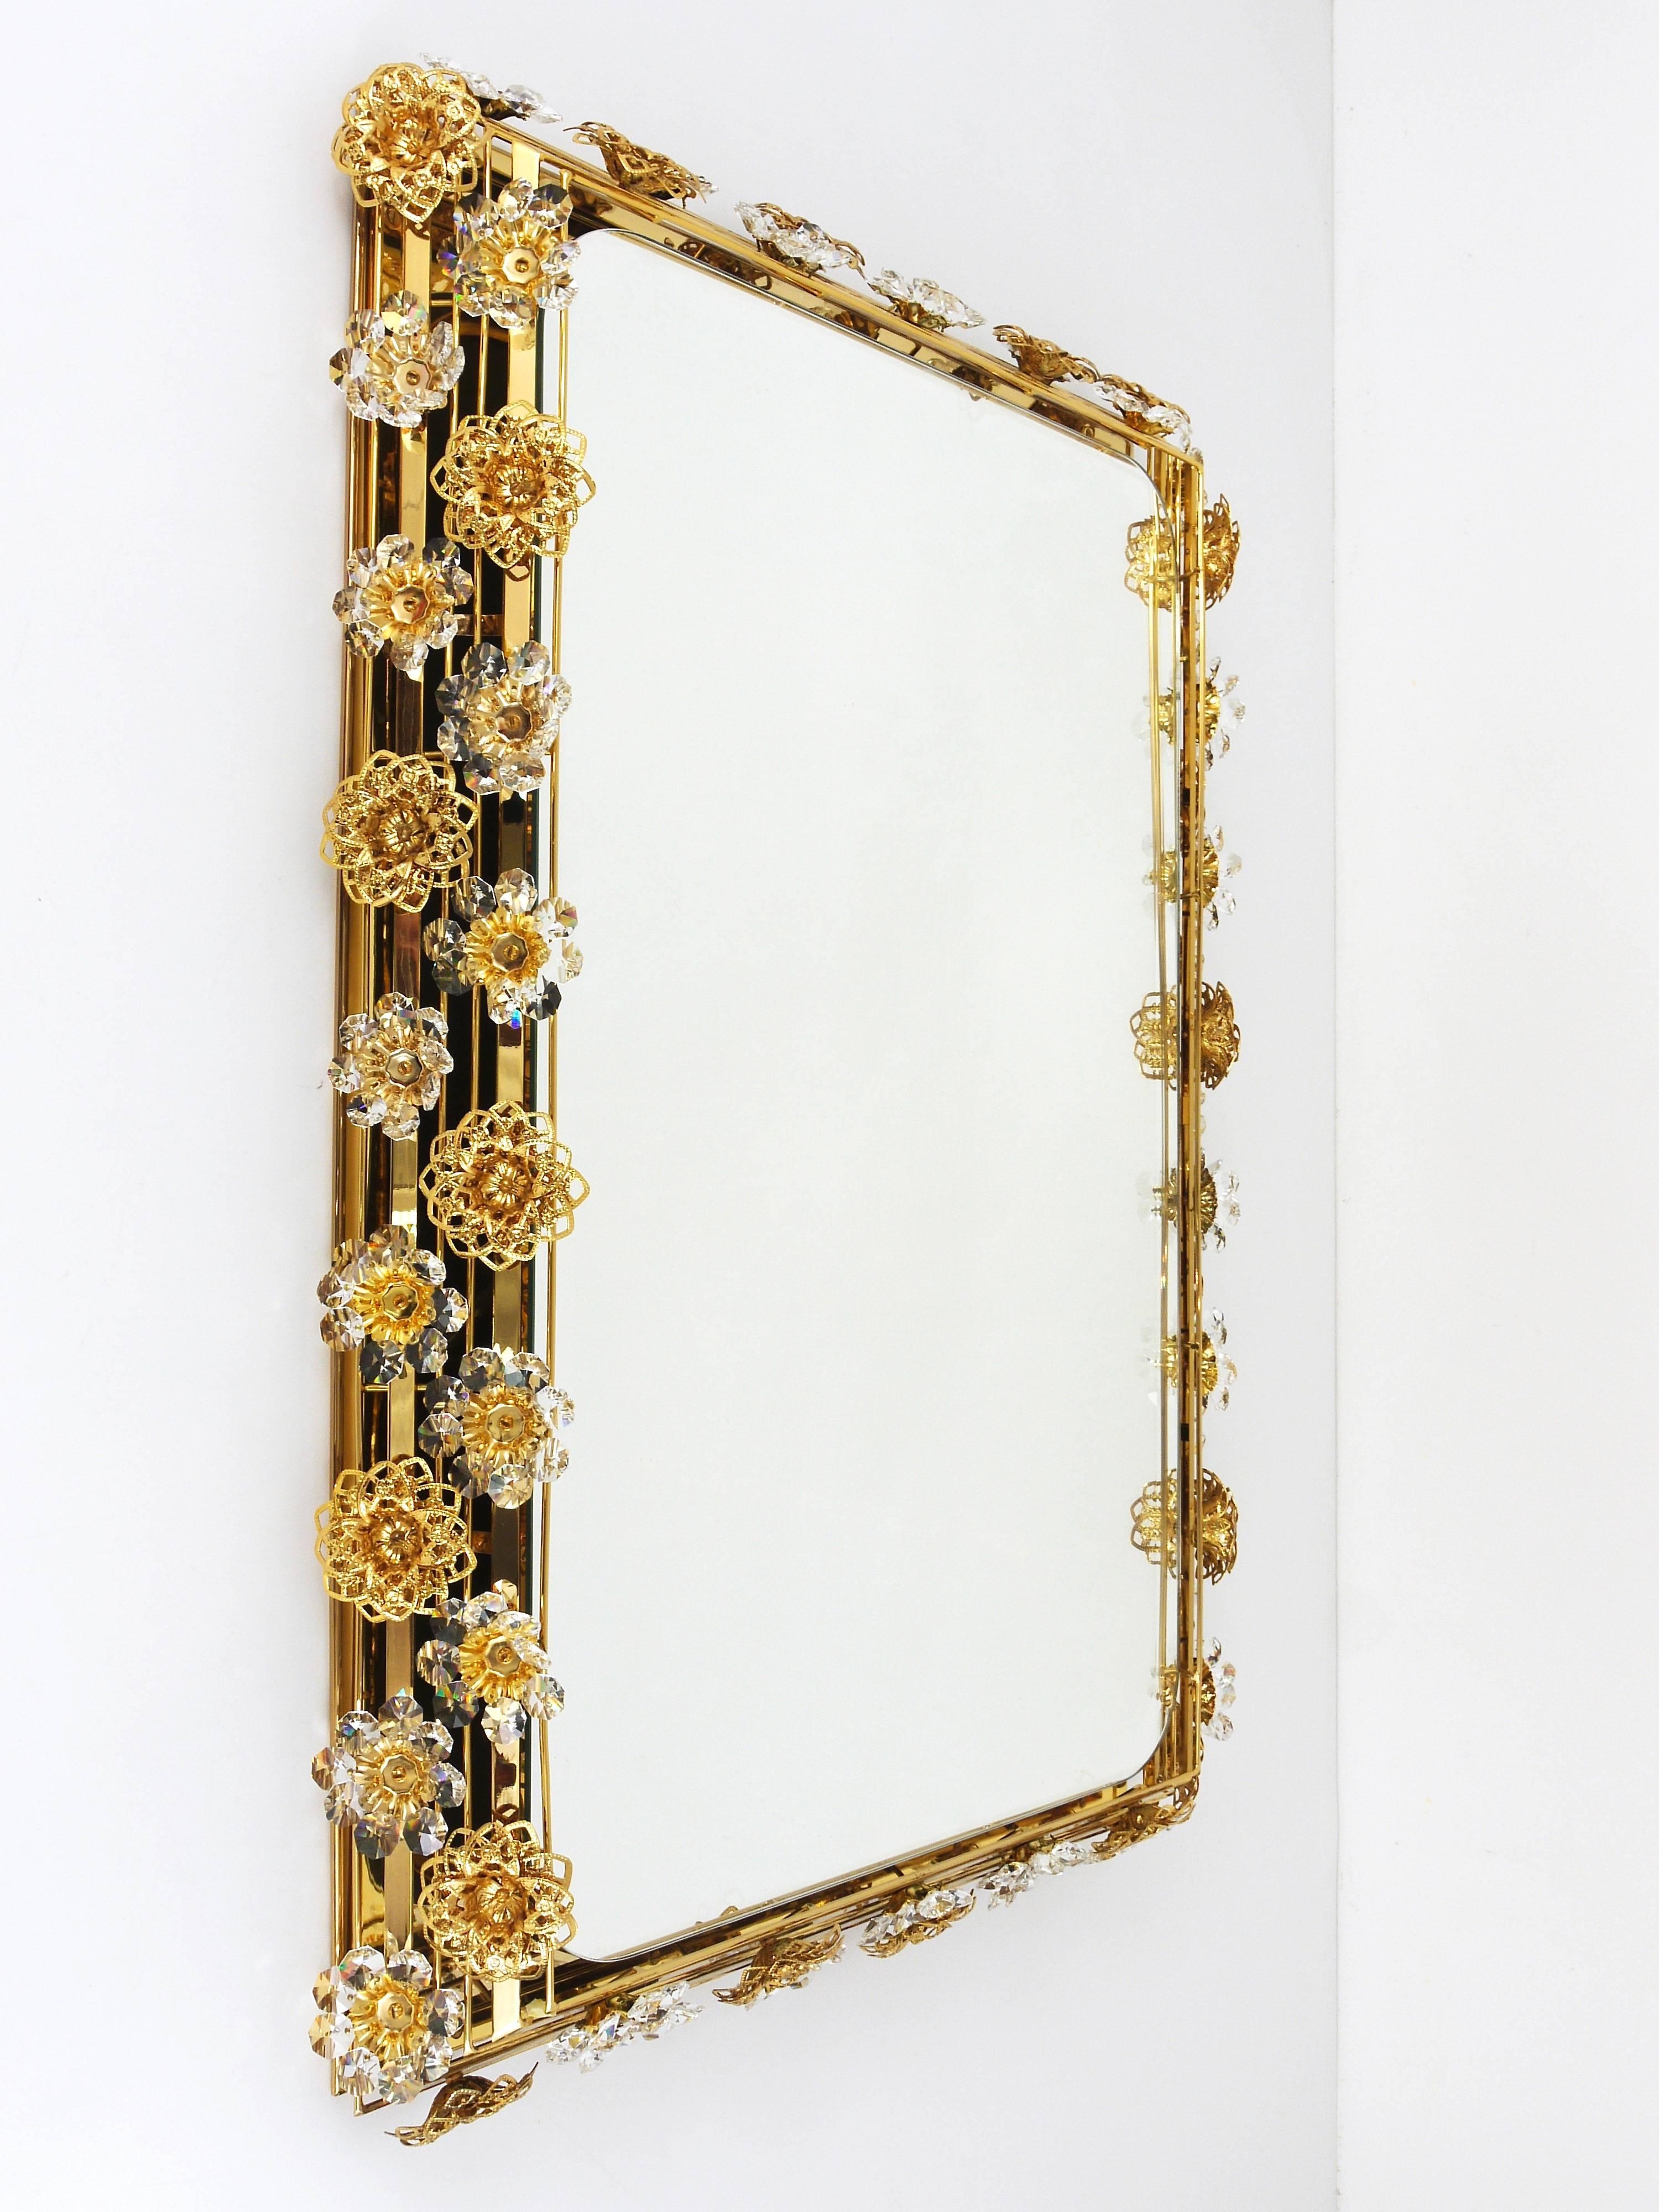 Gilt Ernst Palme Palwa Large Illuminated Flower Wall Mirror, Brass & Crystals, 1970s For Sale